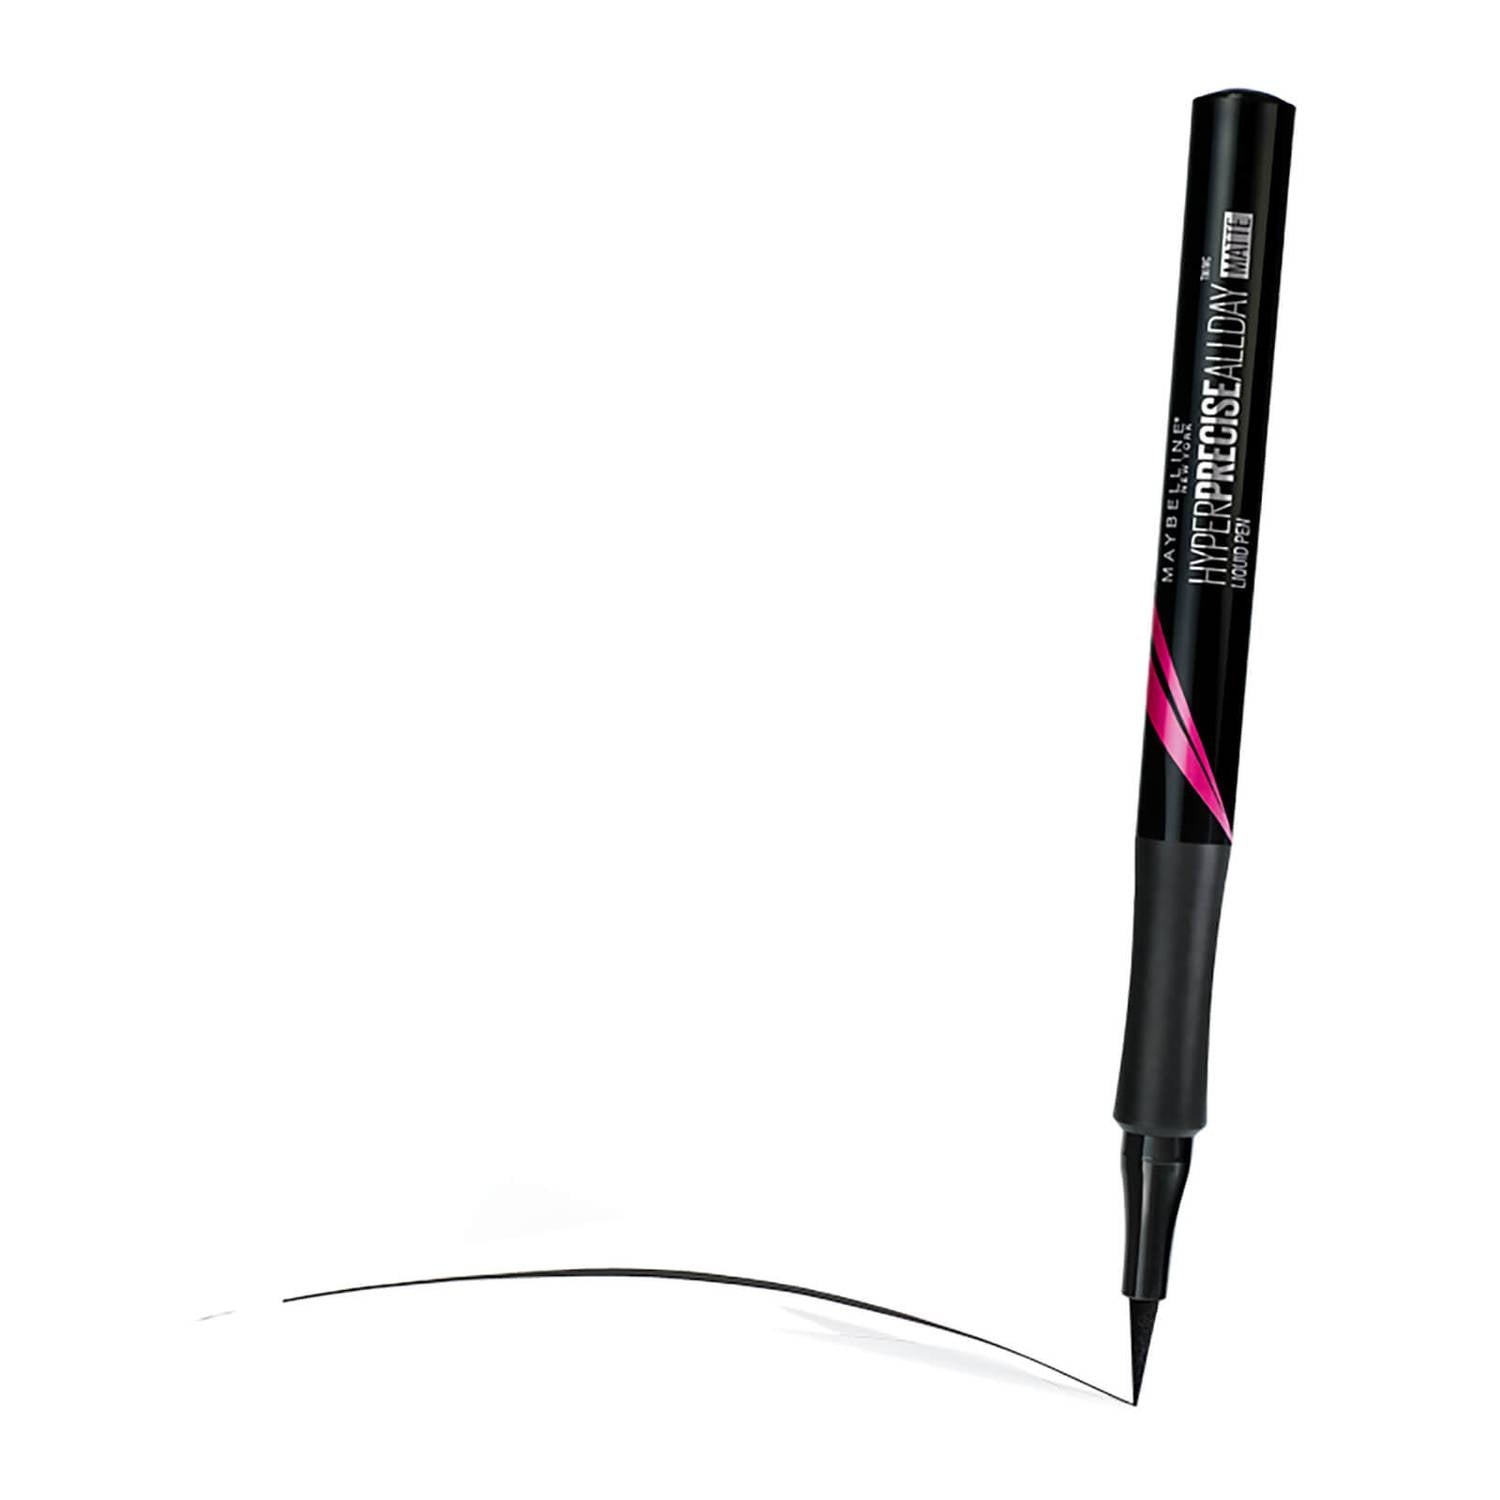 Draw smooth, even lines by starting at the inner corner of the upper eyelid. Step 2. Move the brush tip outwards.